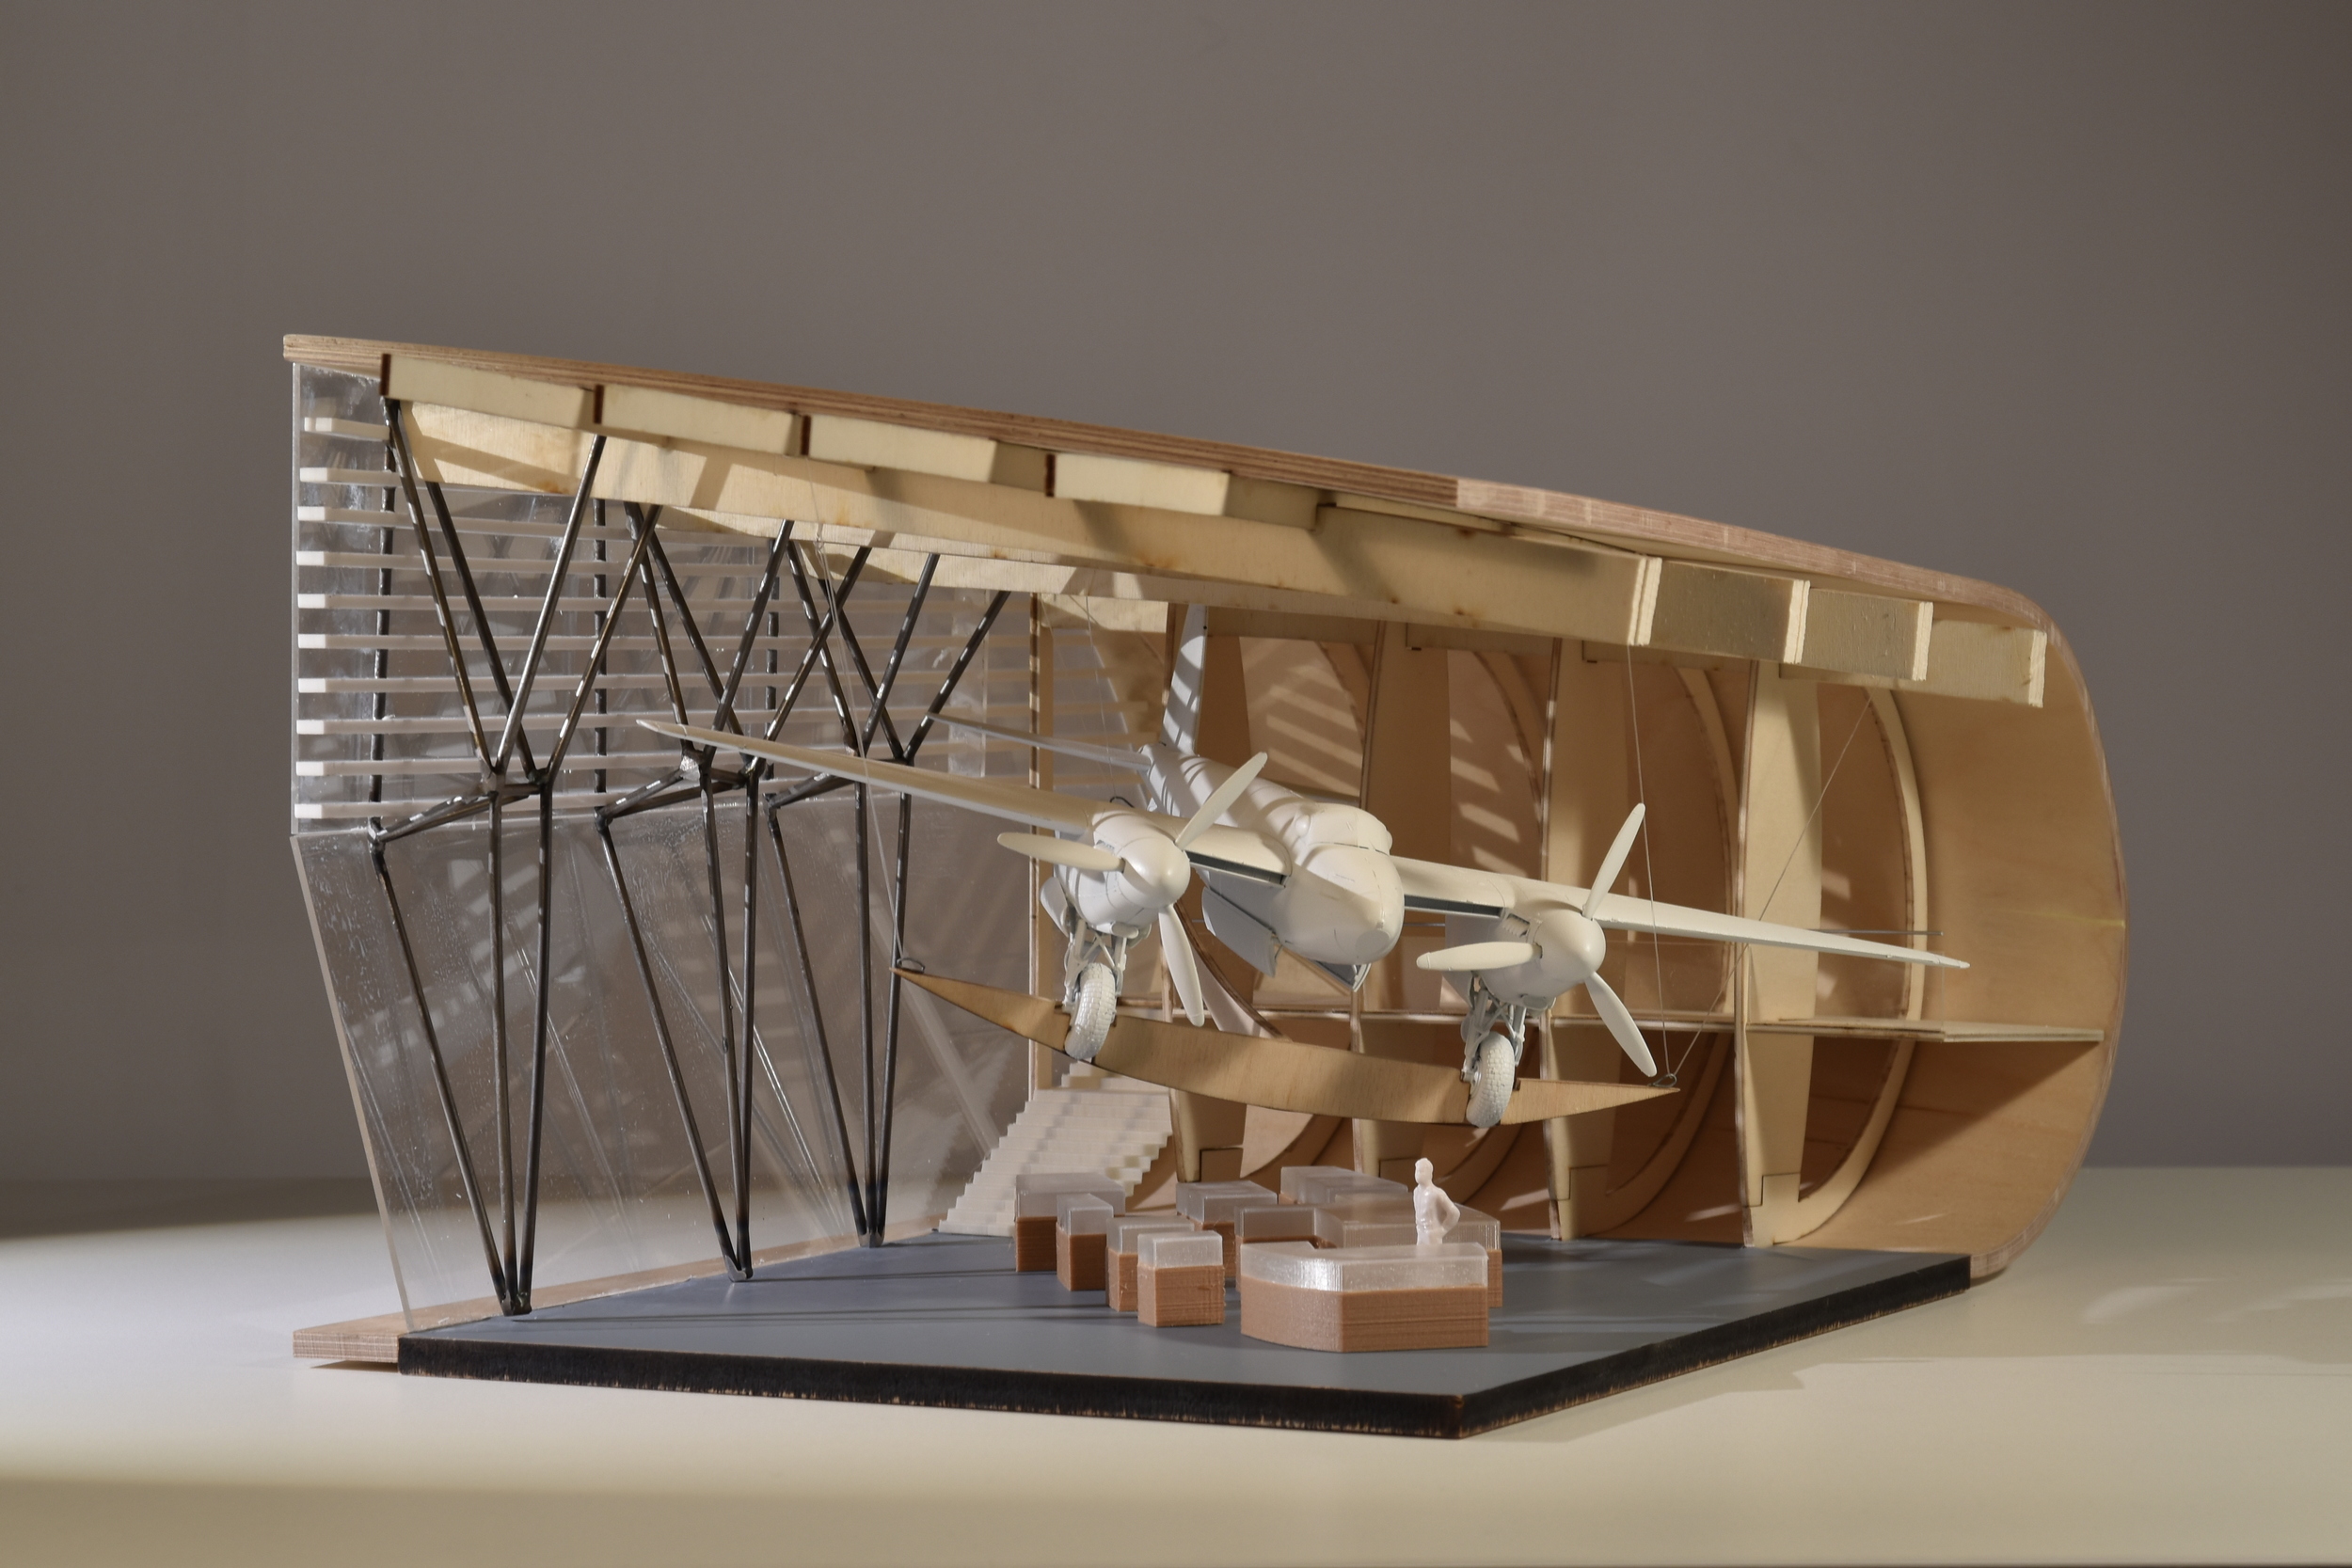 Final exhibition-grade model. Physical model is of an hanger exhibition space with a plane hanging from the ceiling and display cases below.